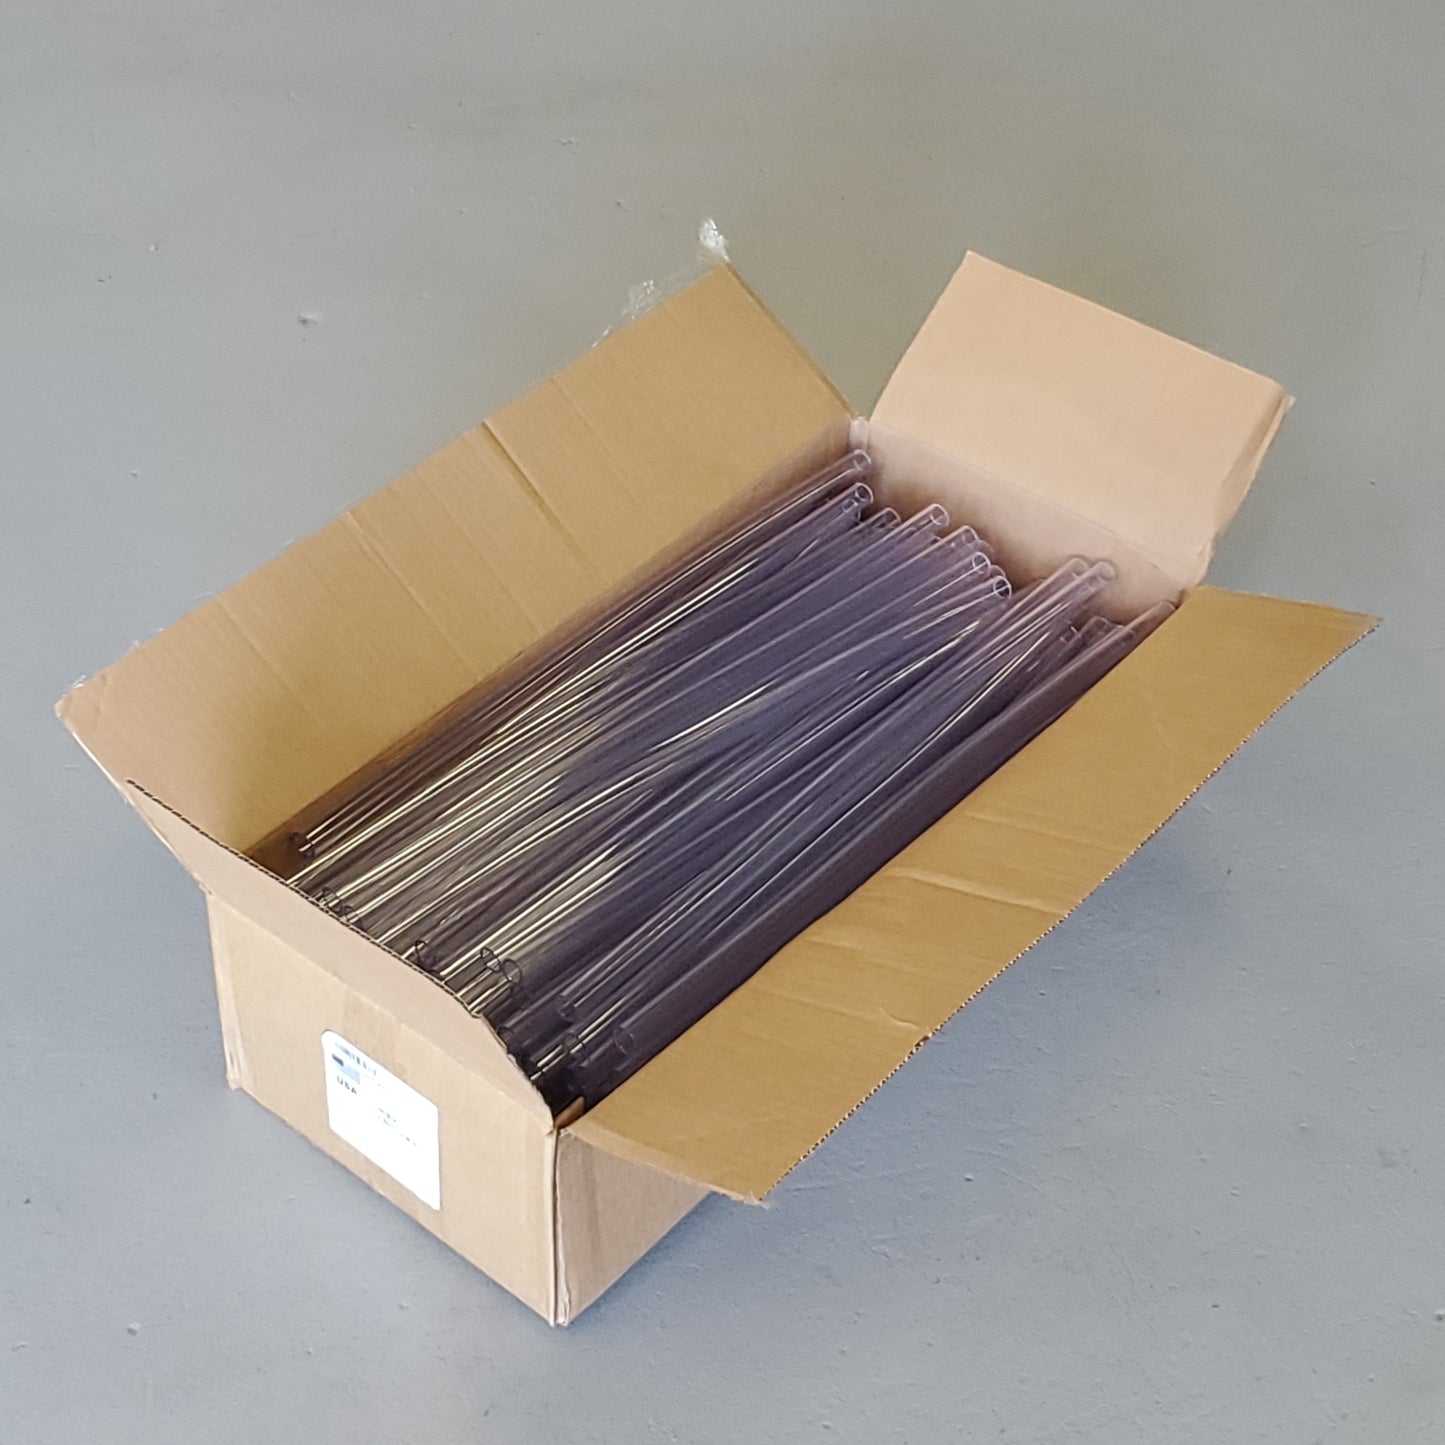 Z@ Case Of 100 PVC Clear Vinyl Tubing / Hoses .625 ID X .812 OD X 24" Long Made In USA (New) C